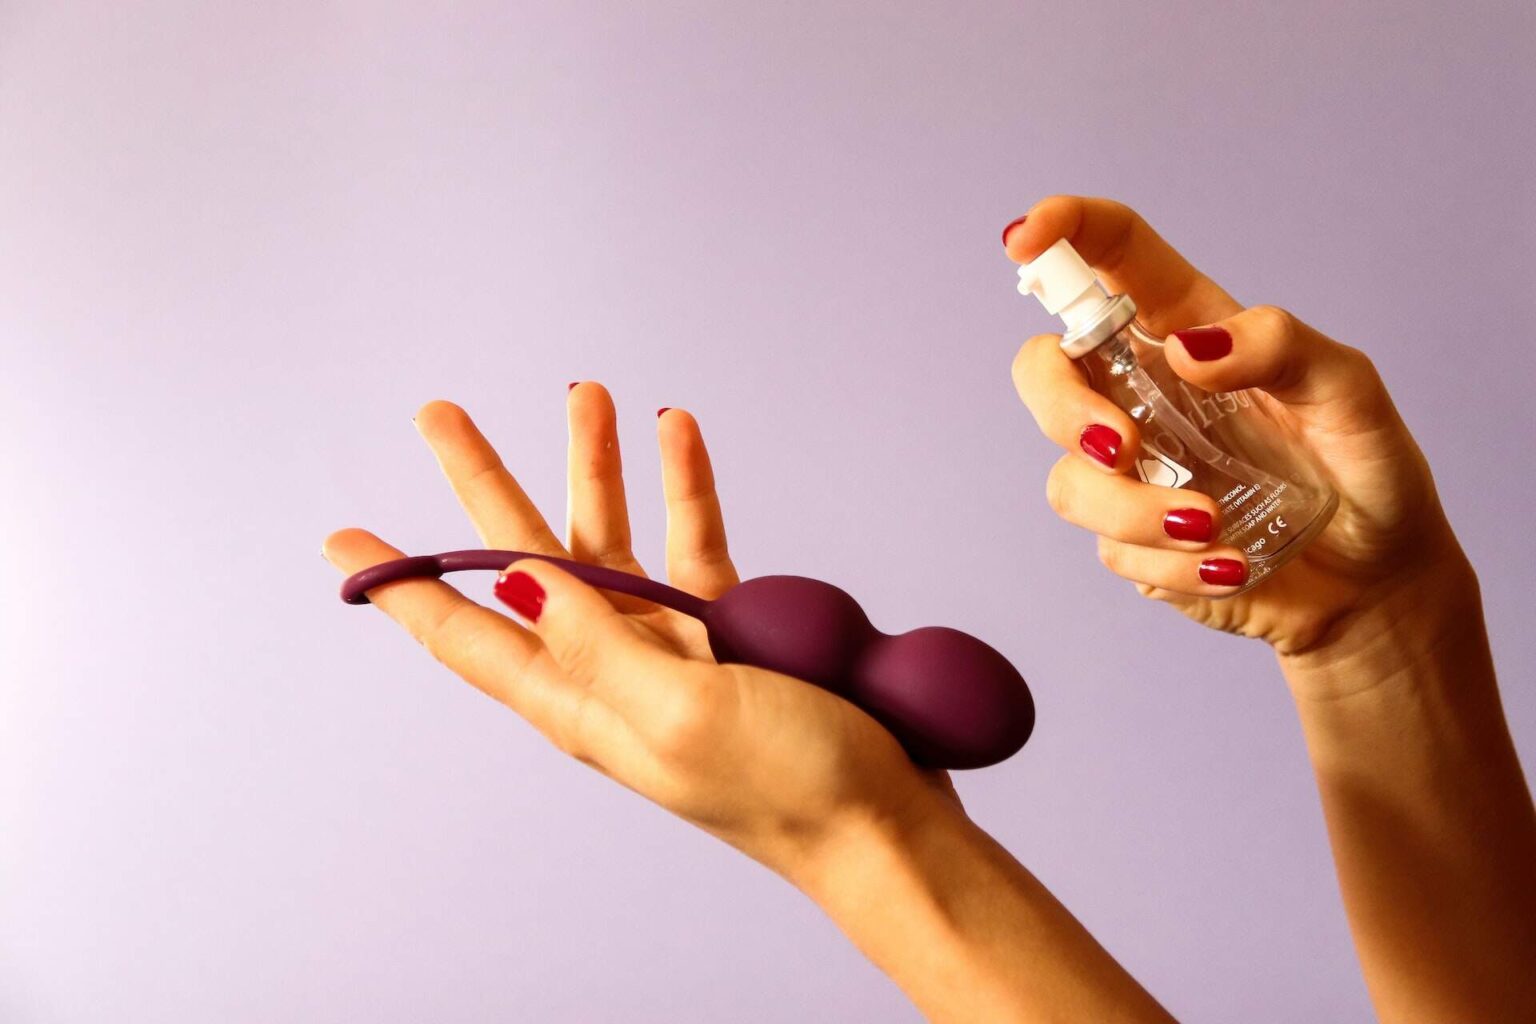 A hand holds a sex toy, while the other hand prepares to spray it with sex toy cleaner against a lavender background.